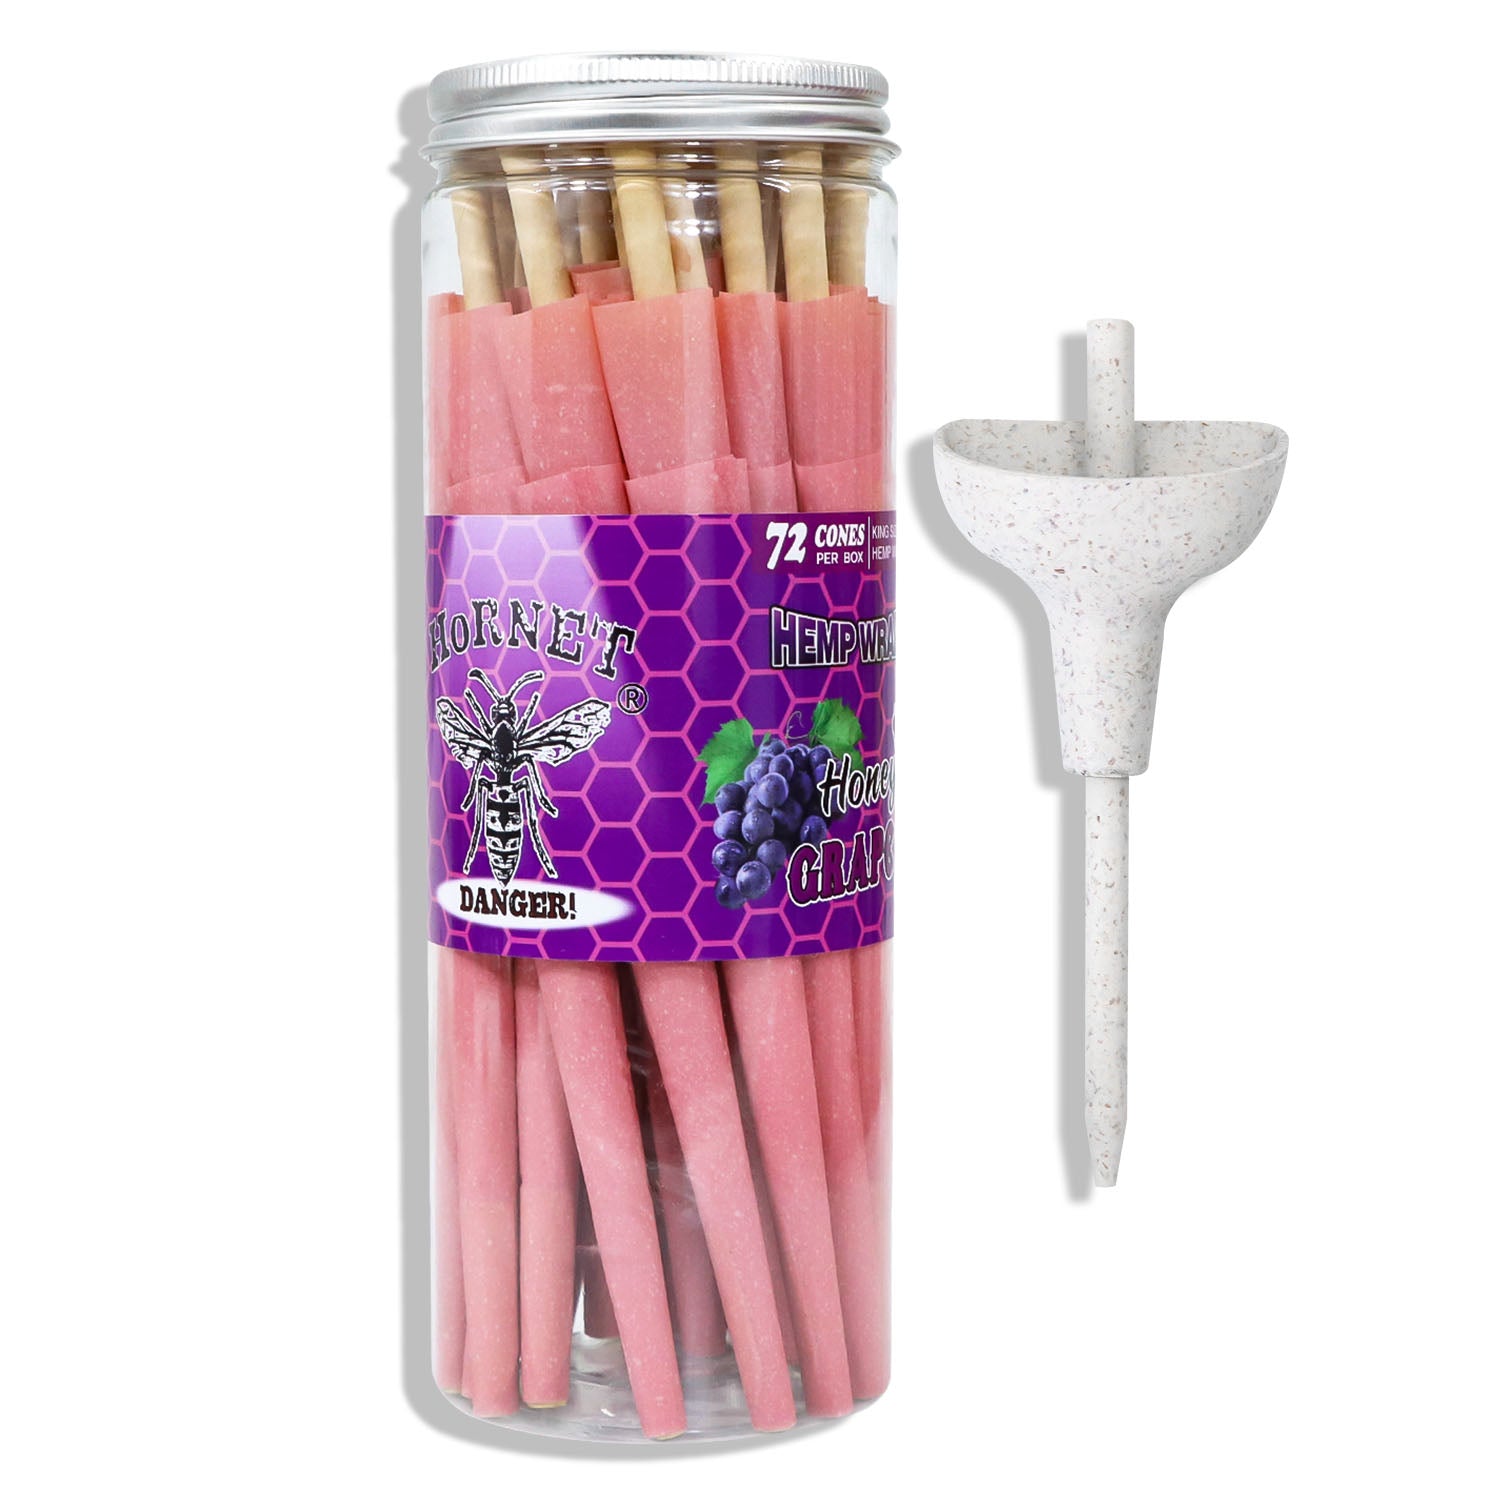 HORNET GRAPE Flavored Pink Pre Rolled Cones, King Size Pre Rolled Rolling Paper with tips, Slow Burning Rolling Cones & load, 72 PCS / Jar